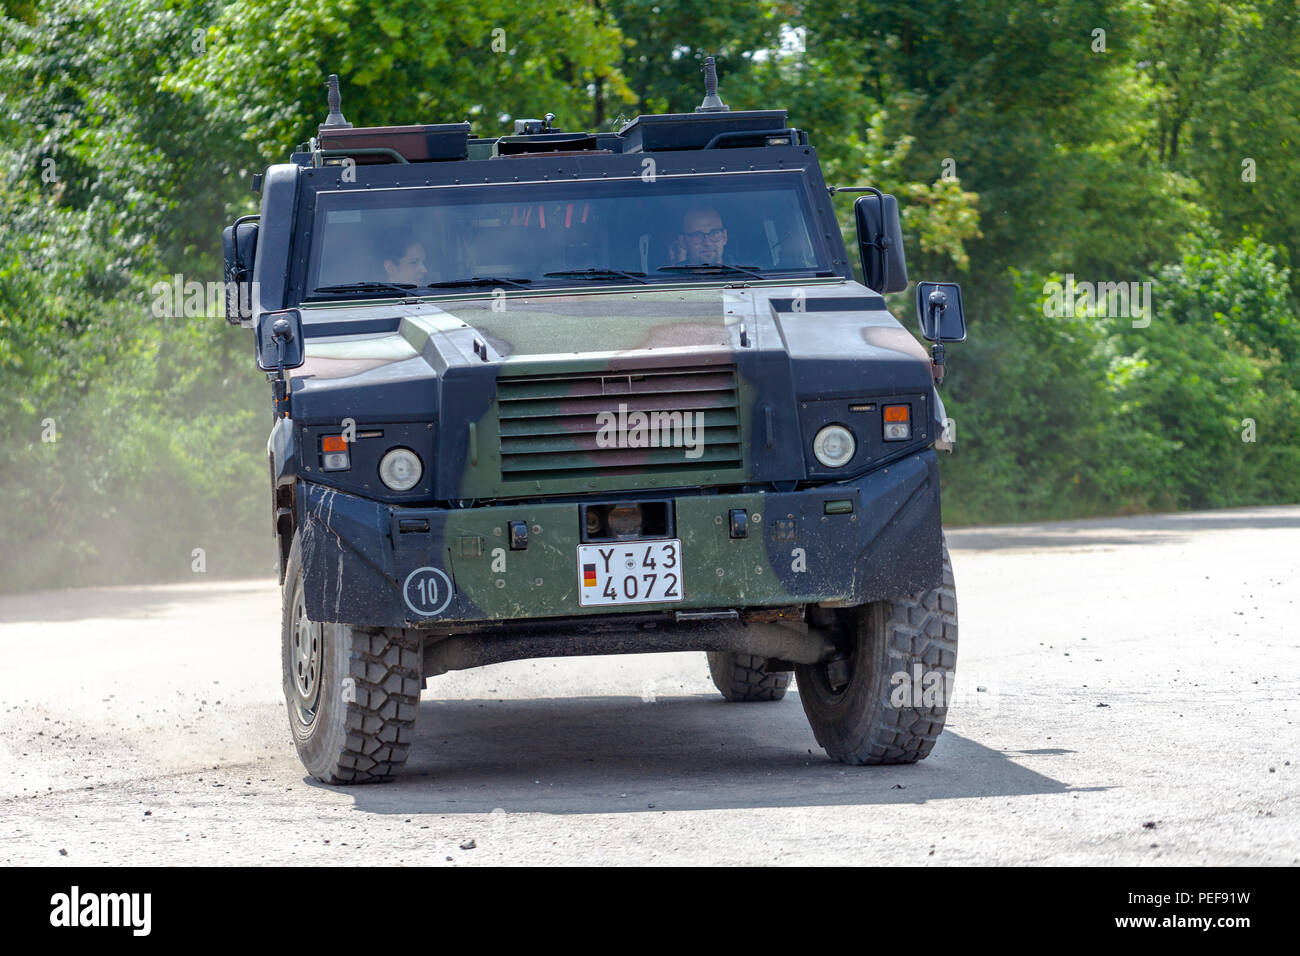 FELDKIRCHEN / GERMANY - JUNE 9, 2018: German armoured personnel carrier MOWAG Eagle, from Bundeswehr, drives on a road at Day of the Bundeswehr. Stock Photo